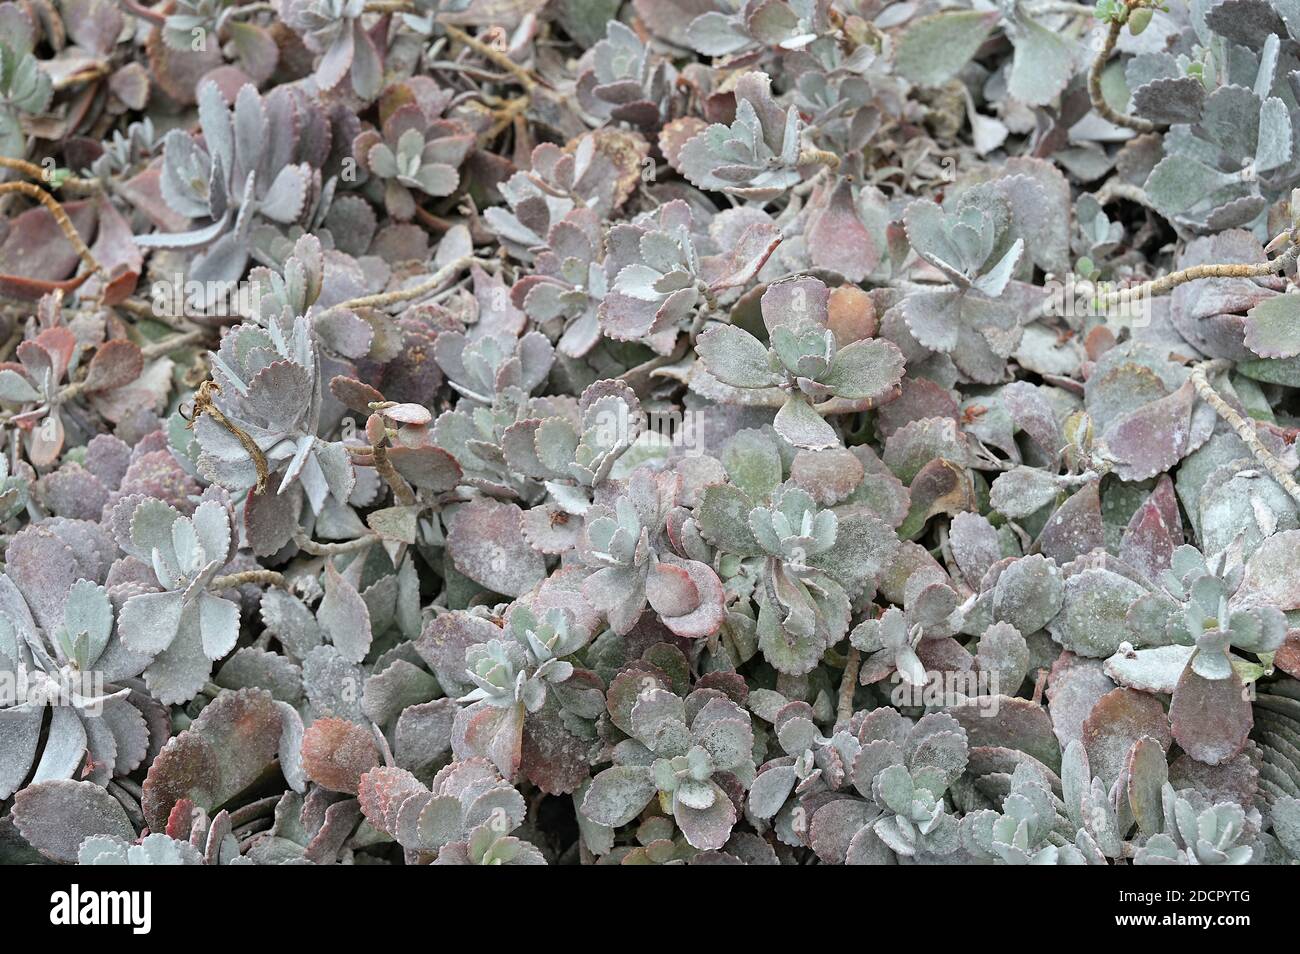 Clumping bush of Kalanchoe pumila succulent or Flower Dust Plant, with silver grey leaves covered with whitish waxy hair, giving a frosted appearance Stock Photo